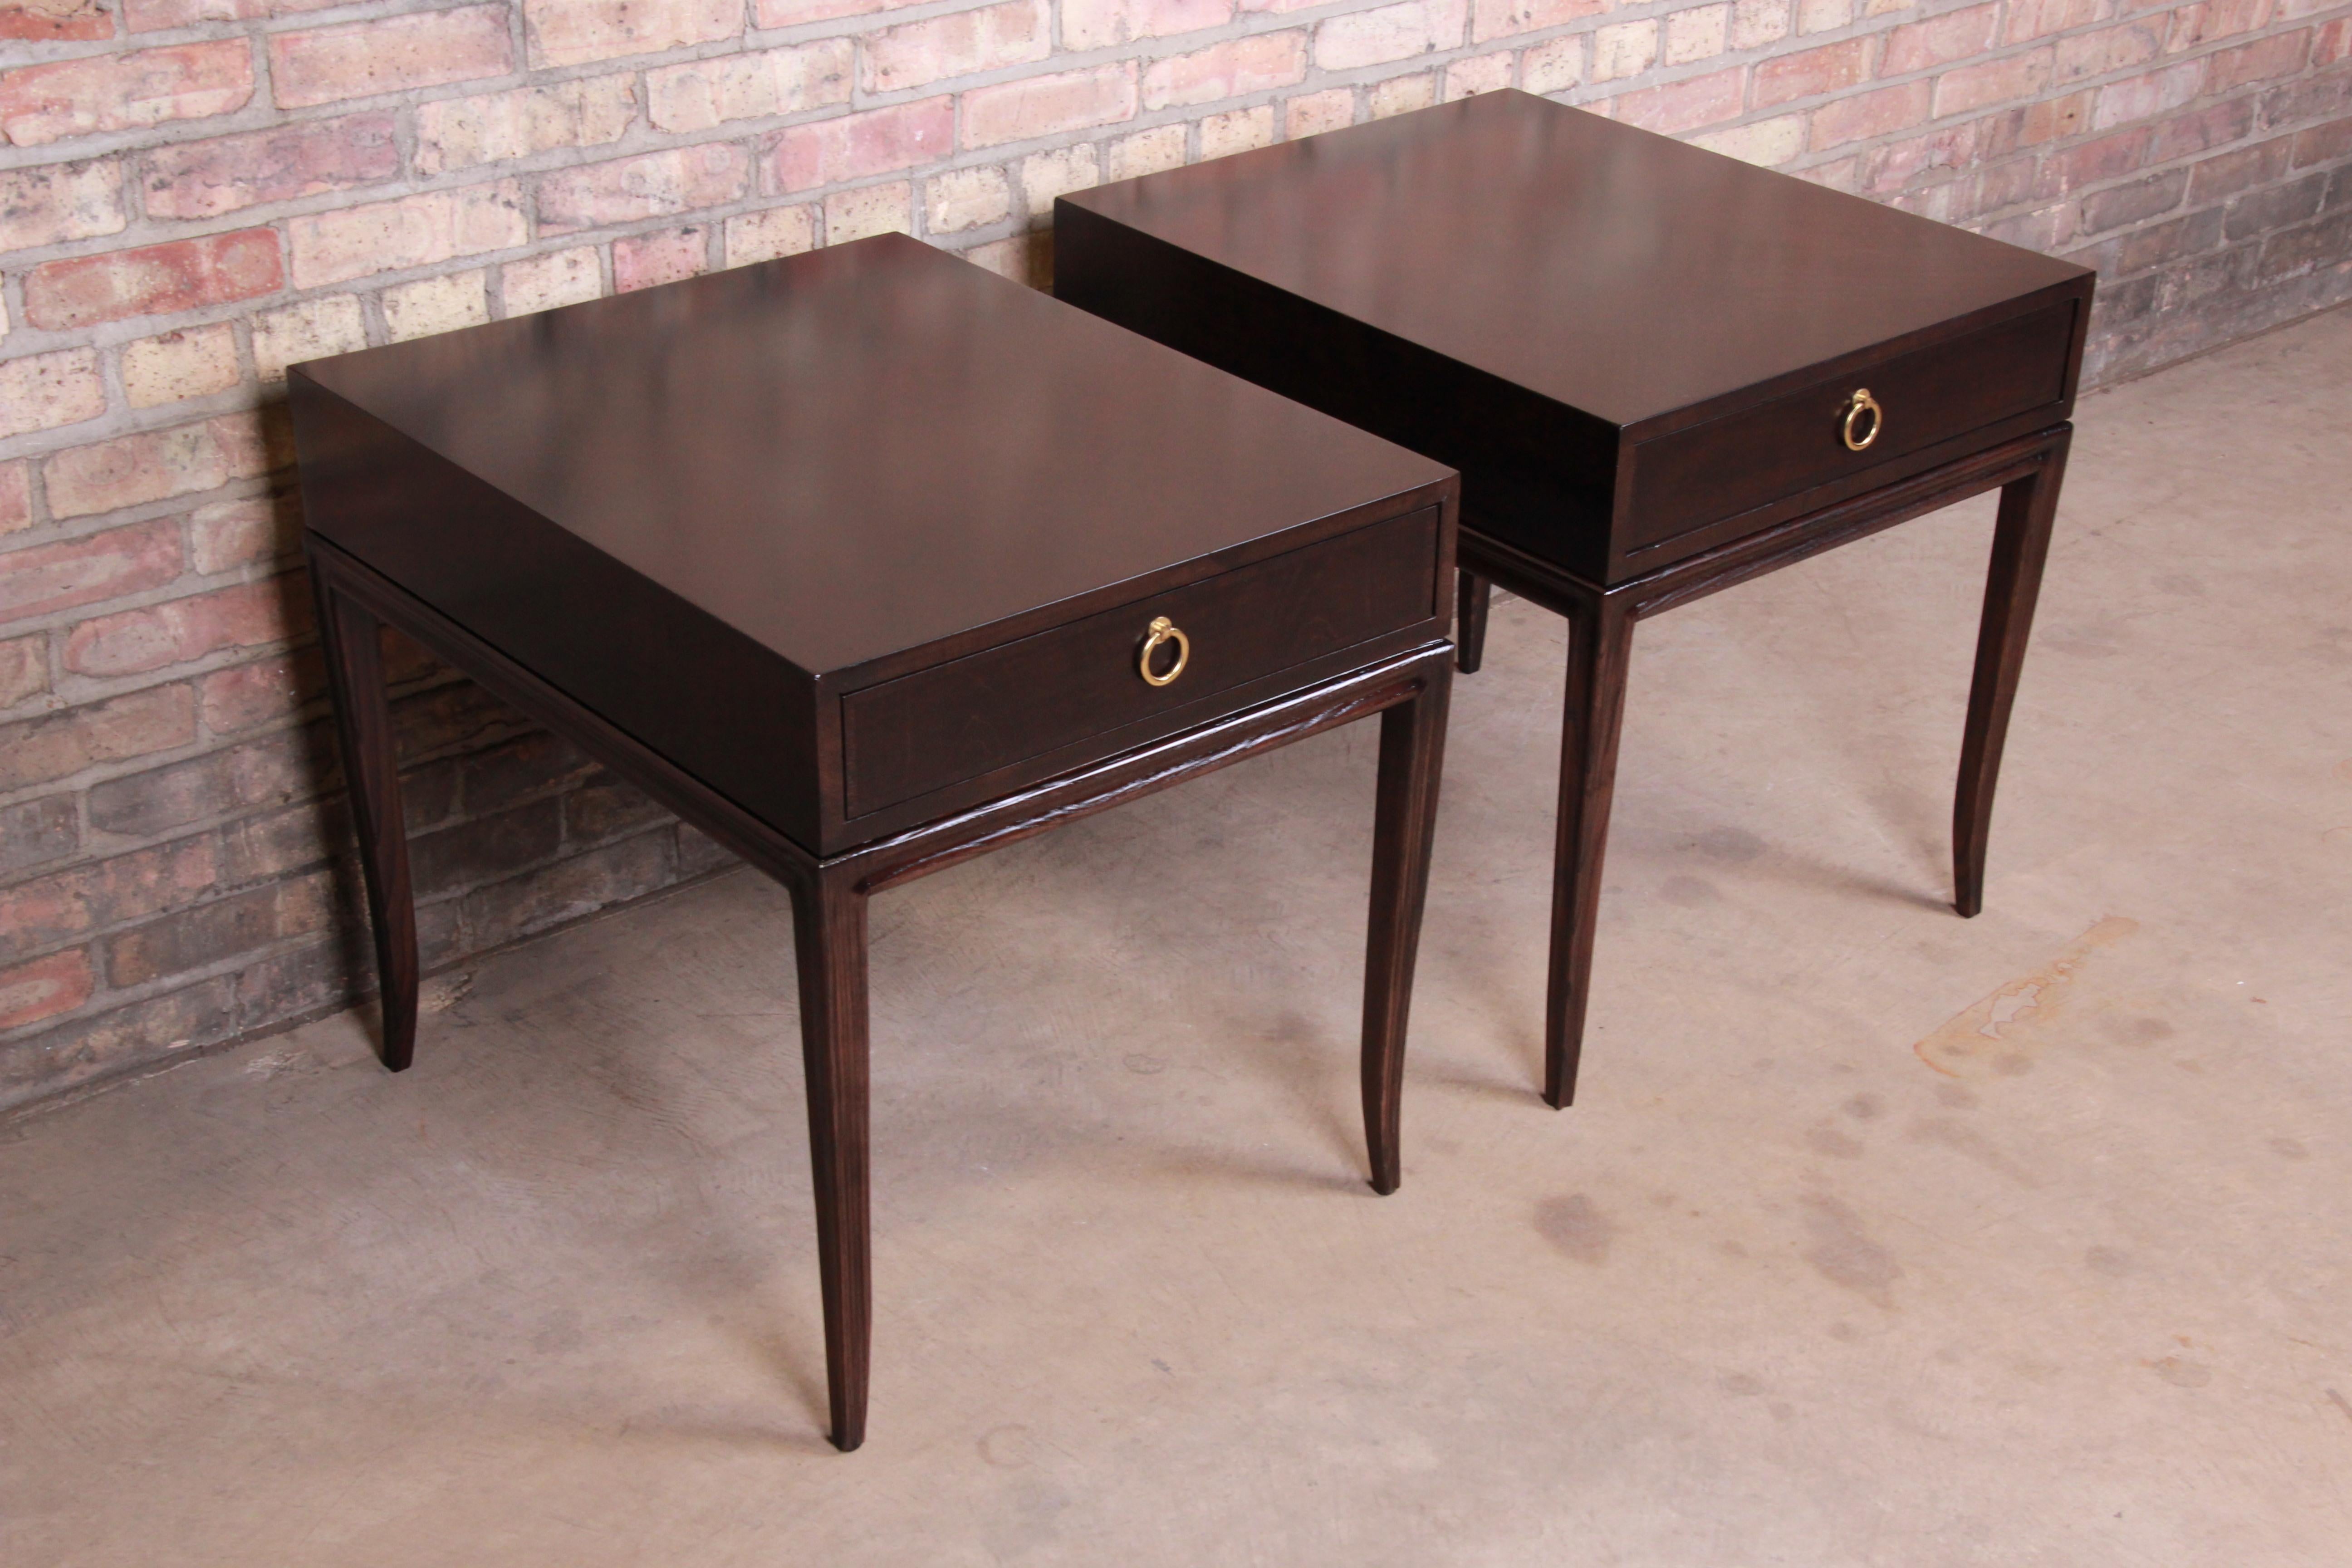 20th Century Drexel Heritage Hollywood Regency Mahogany Nightstands or End Tables, Refinished